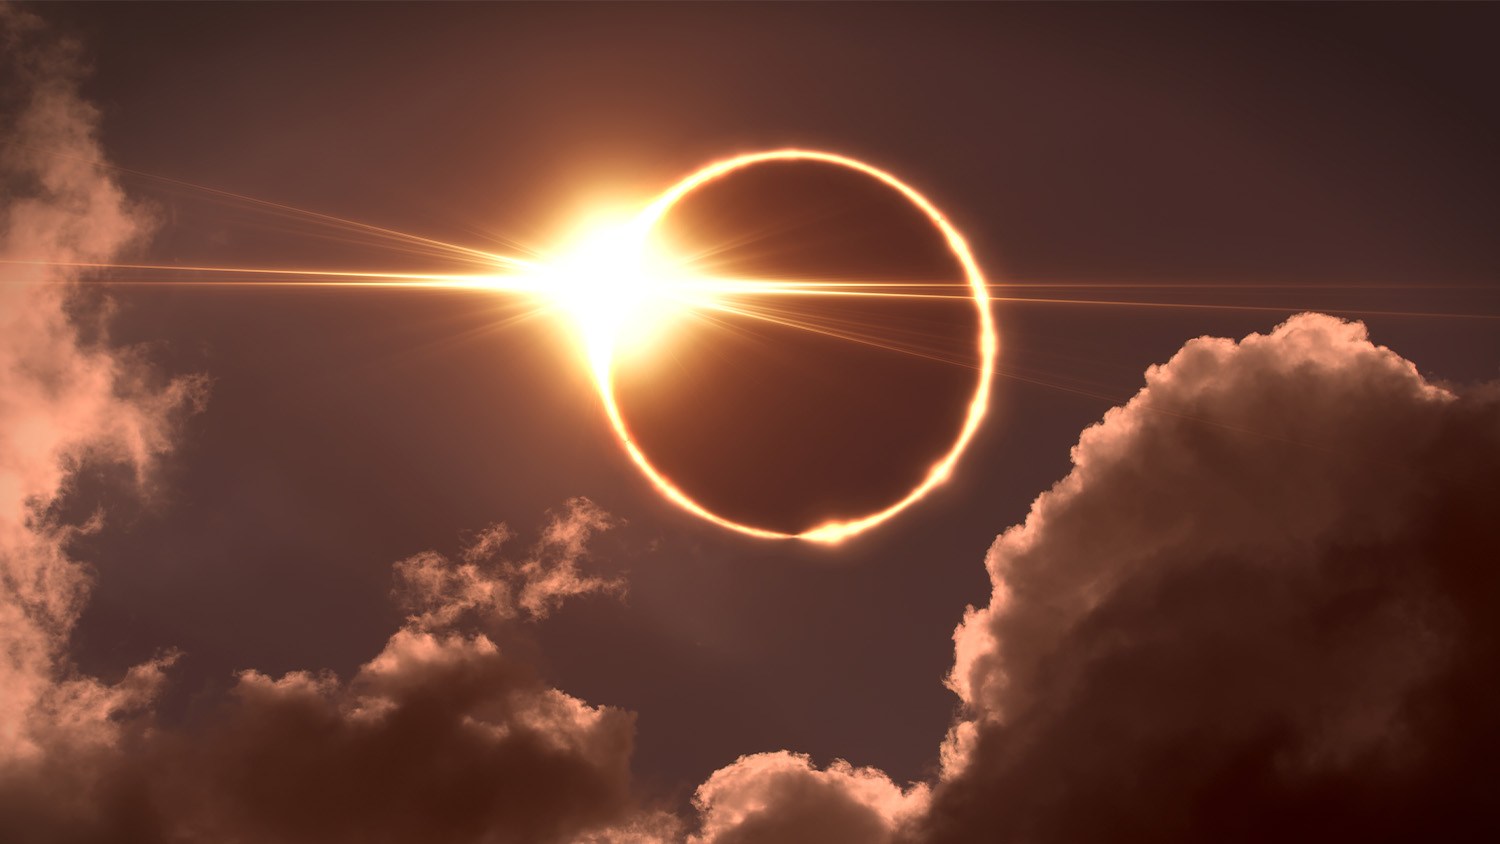 Warby Parker is giving away free solar eclipse glasses here’s how to